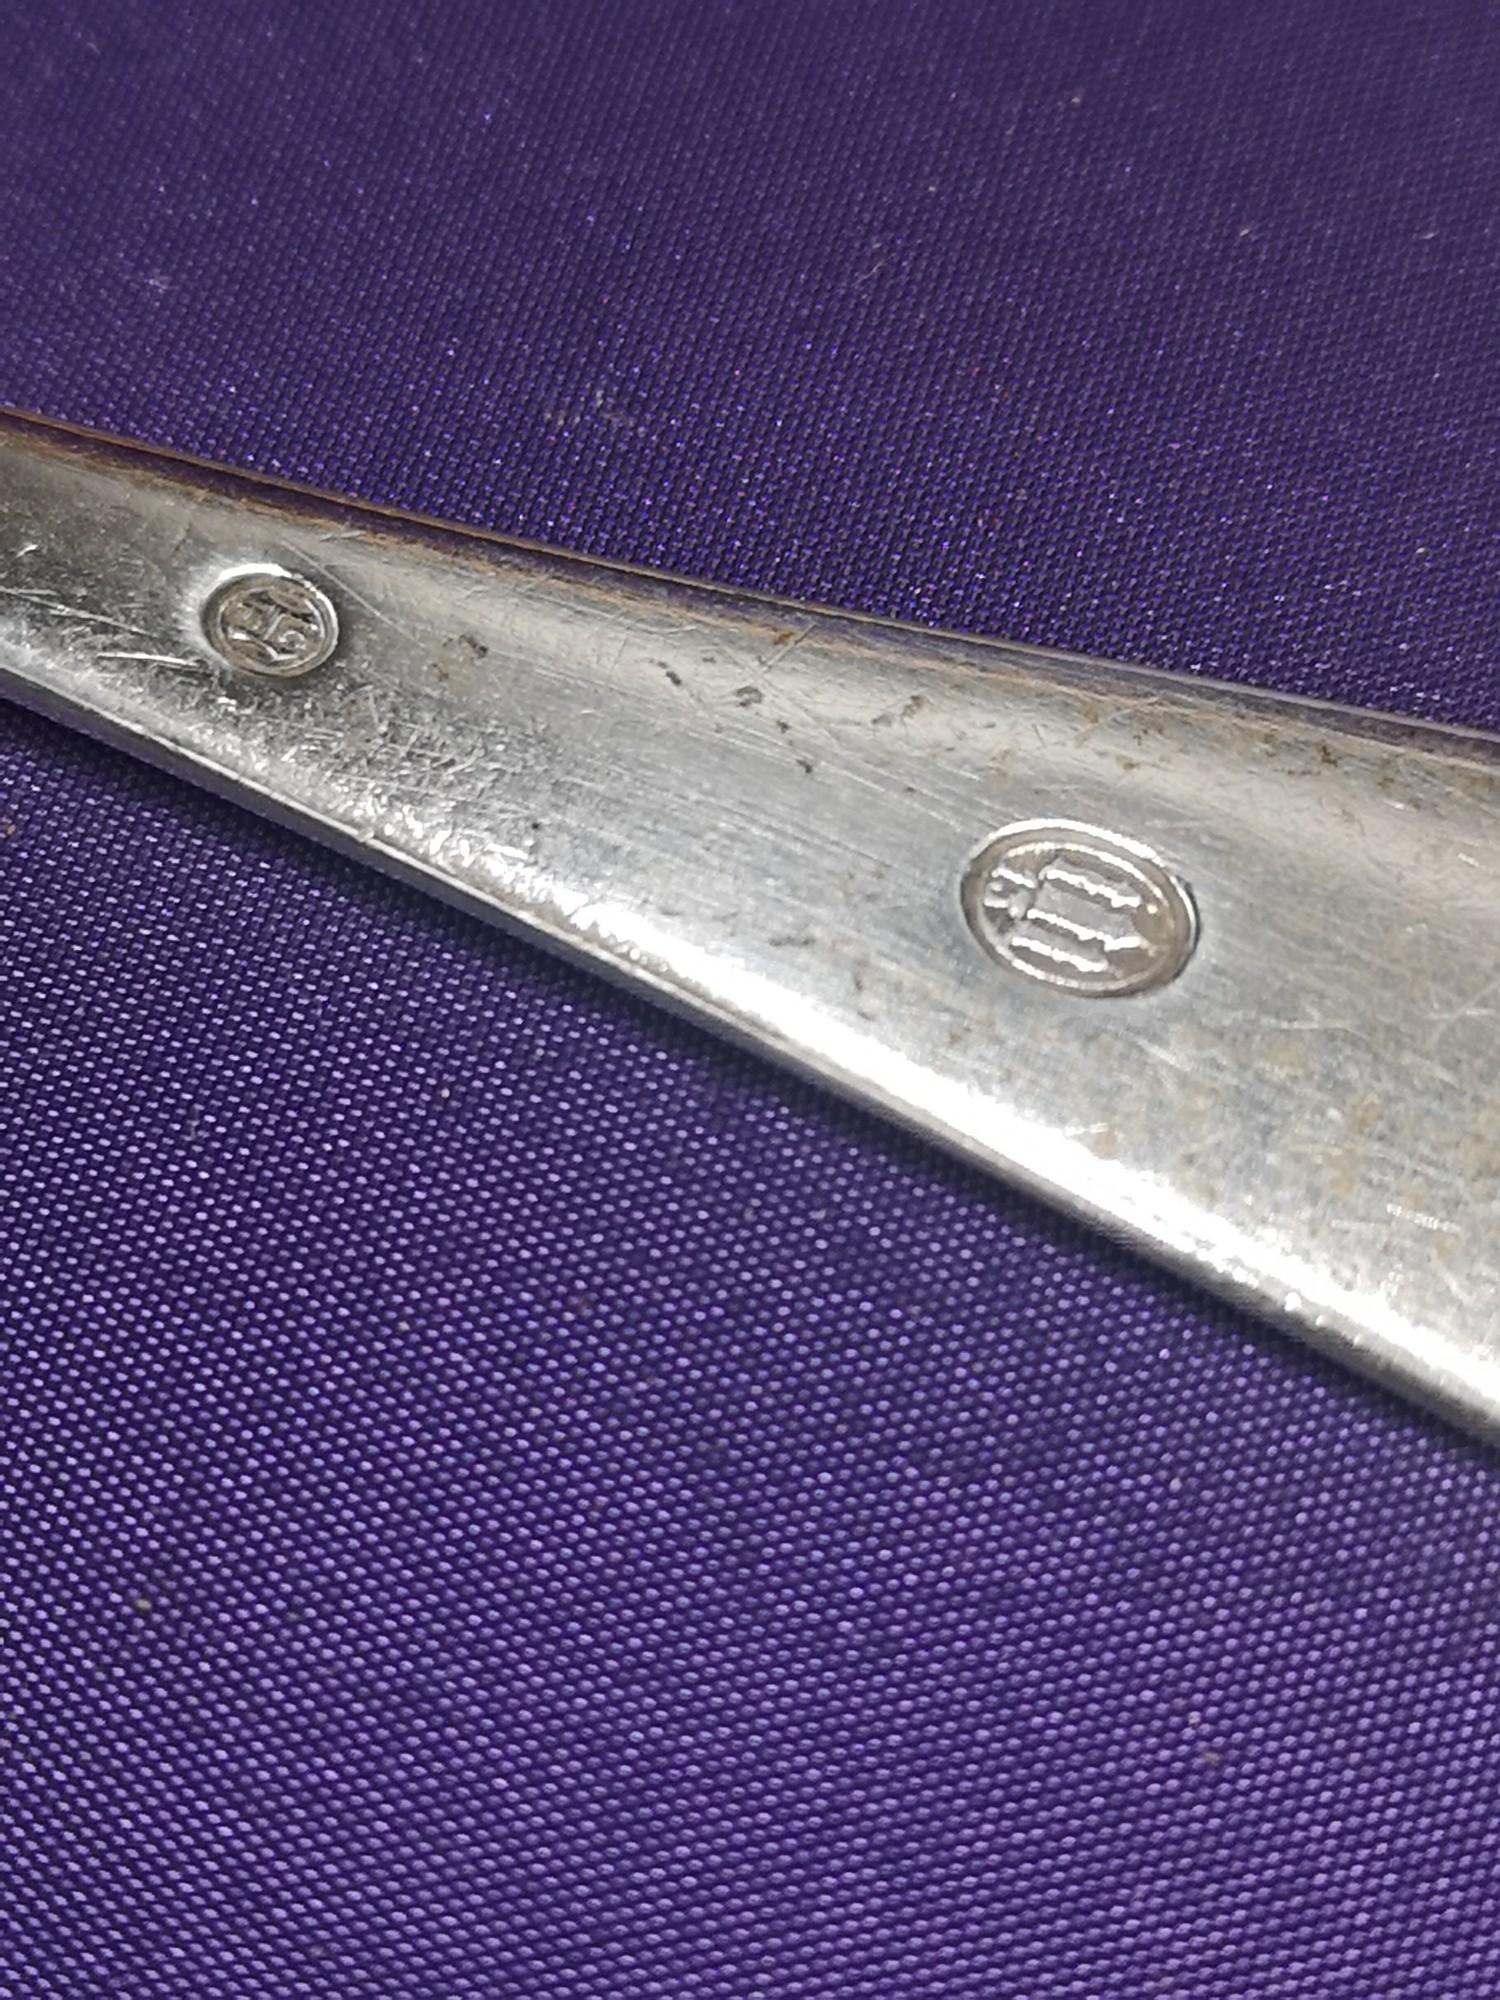 Large Danish silver Hall marked desert spoon maker Christian F Heise dated 1913. - Image 2 of 2